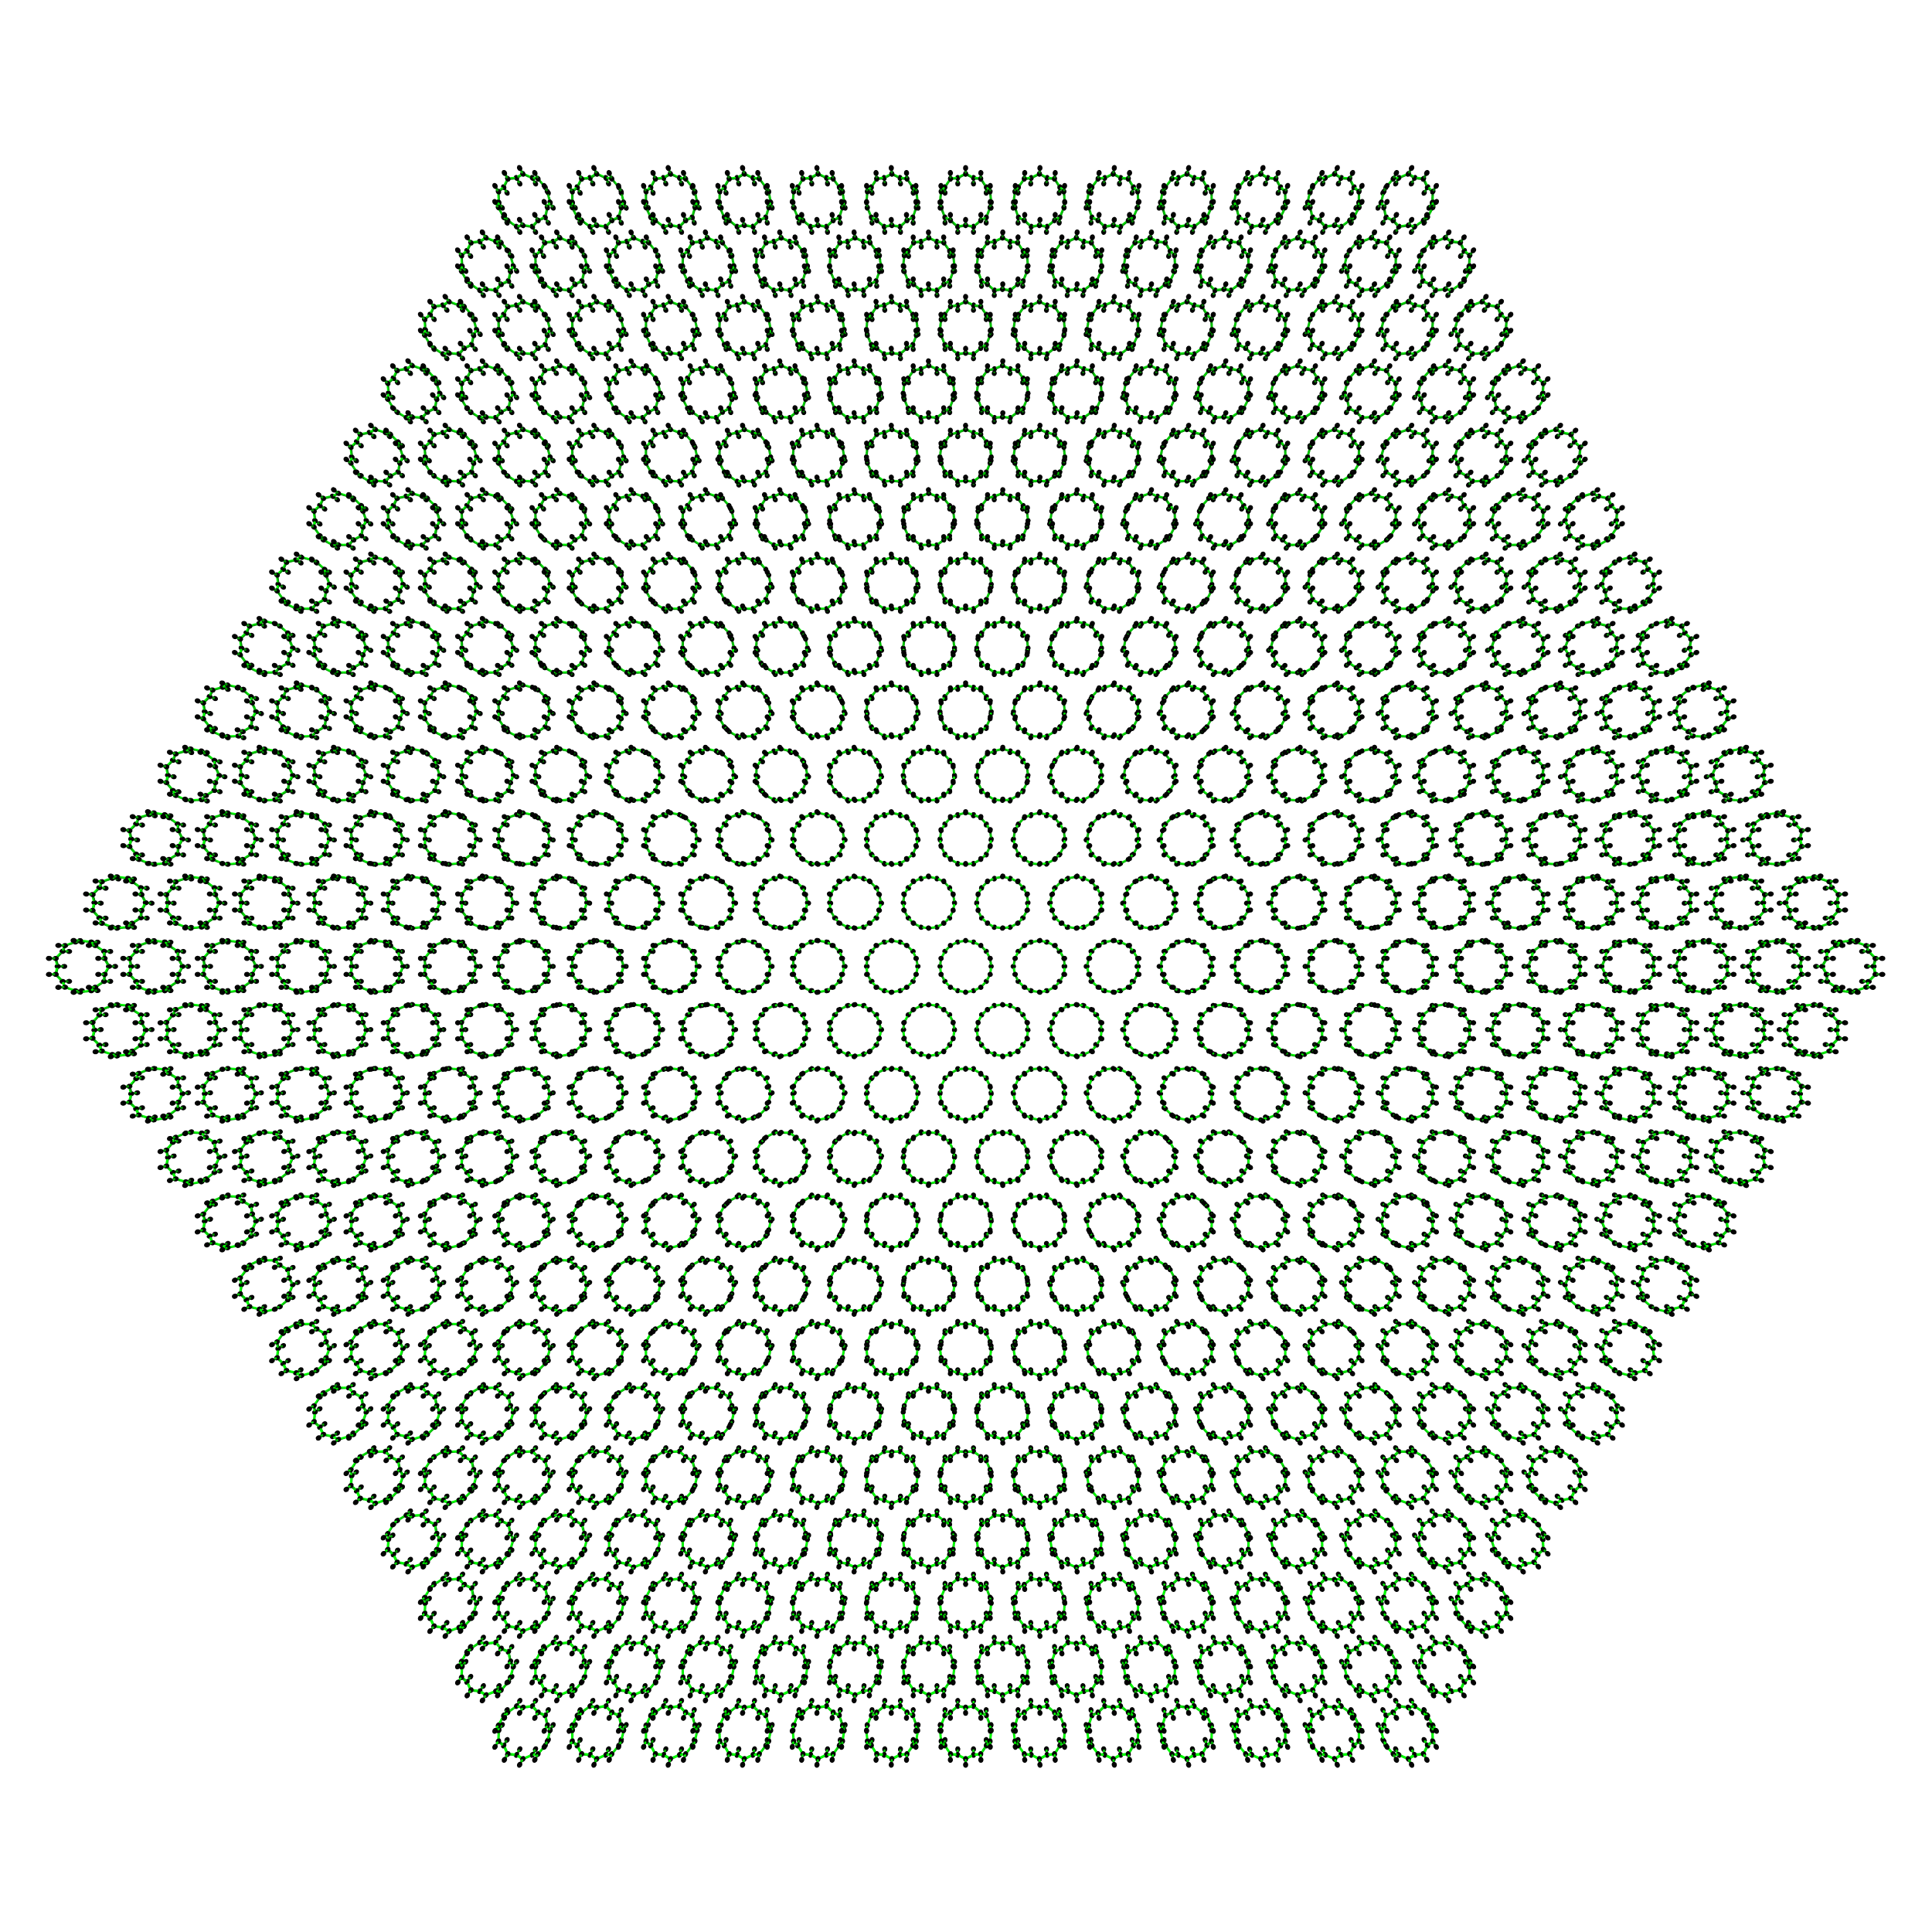 ../_images/1000_hcp_469tube_hexagon-01.png